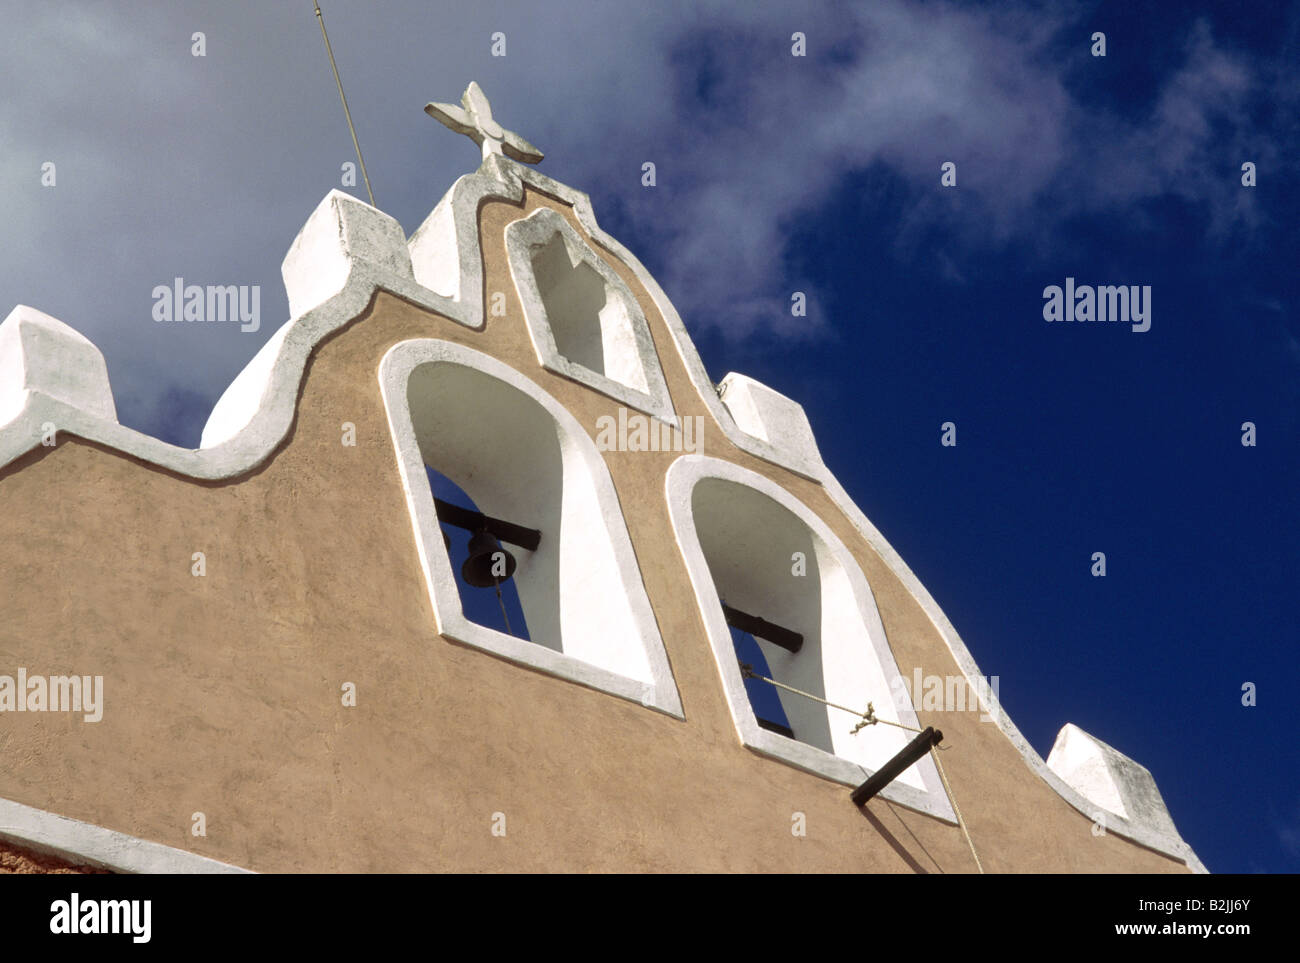 Historic building Church Bell tower Painted plaster white edging Bell VALLADOLID YUCATAN MEXICO Stock Photo